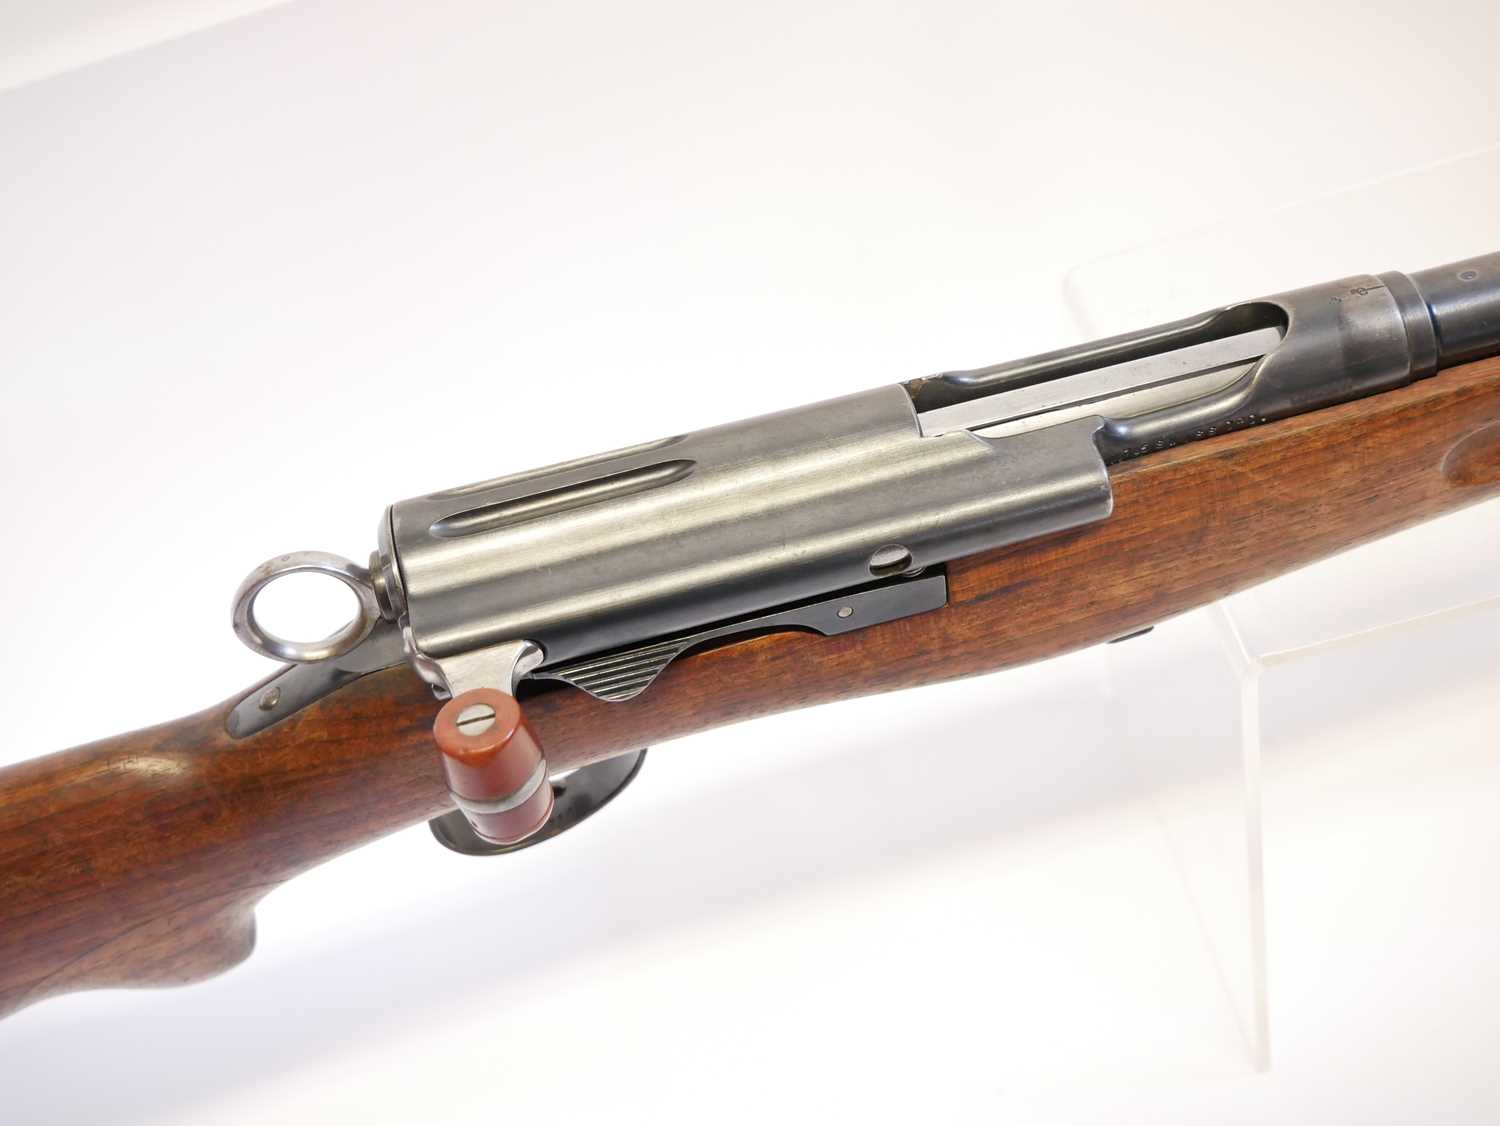 Schmidt Rubin 1896 7.5mm straight pull rifle, matching serial numbers 268510 to barrel, receiver, - Image 4 of 15